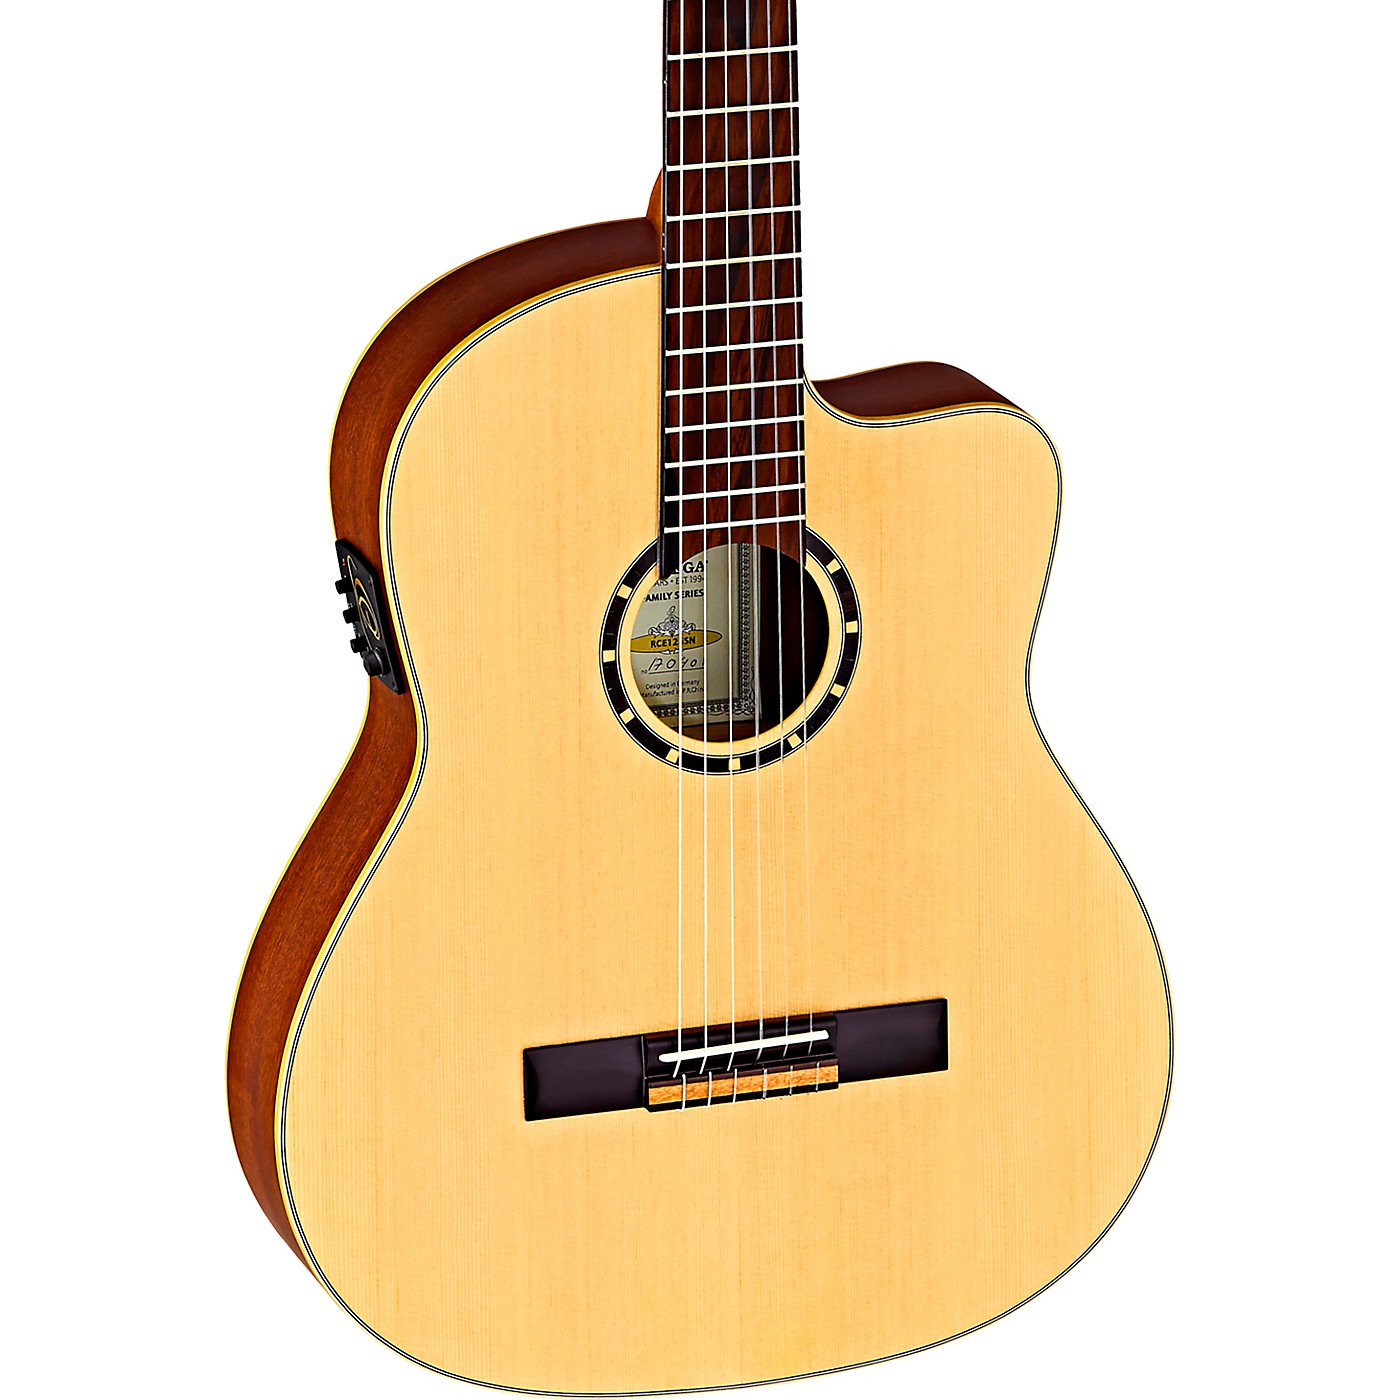 Ortega Family Series RCE125SN Thinline Acoustic-Electric Classical Guitar thumbnail